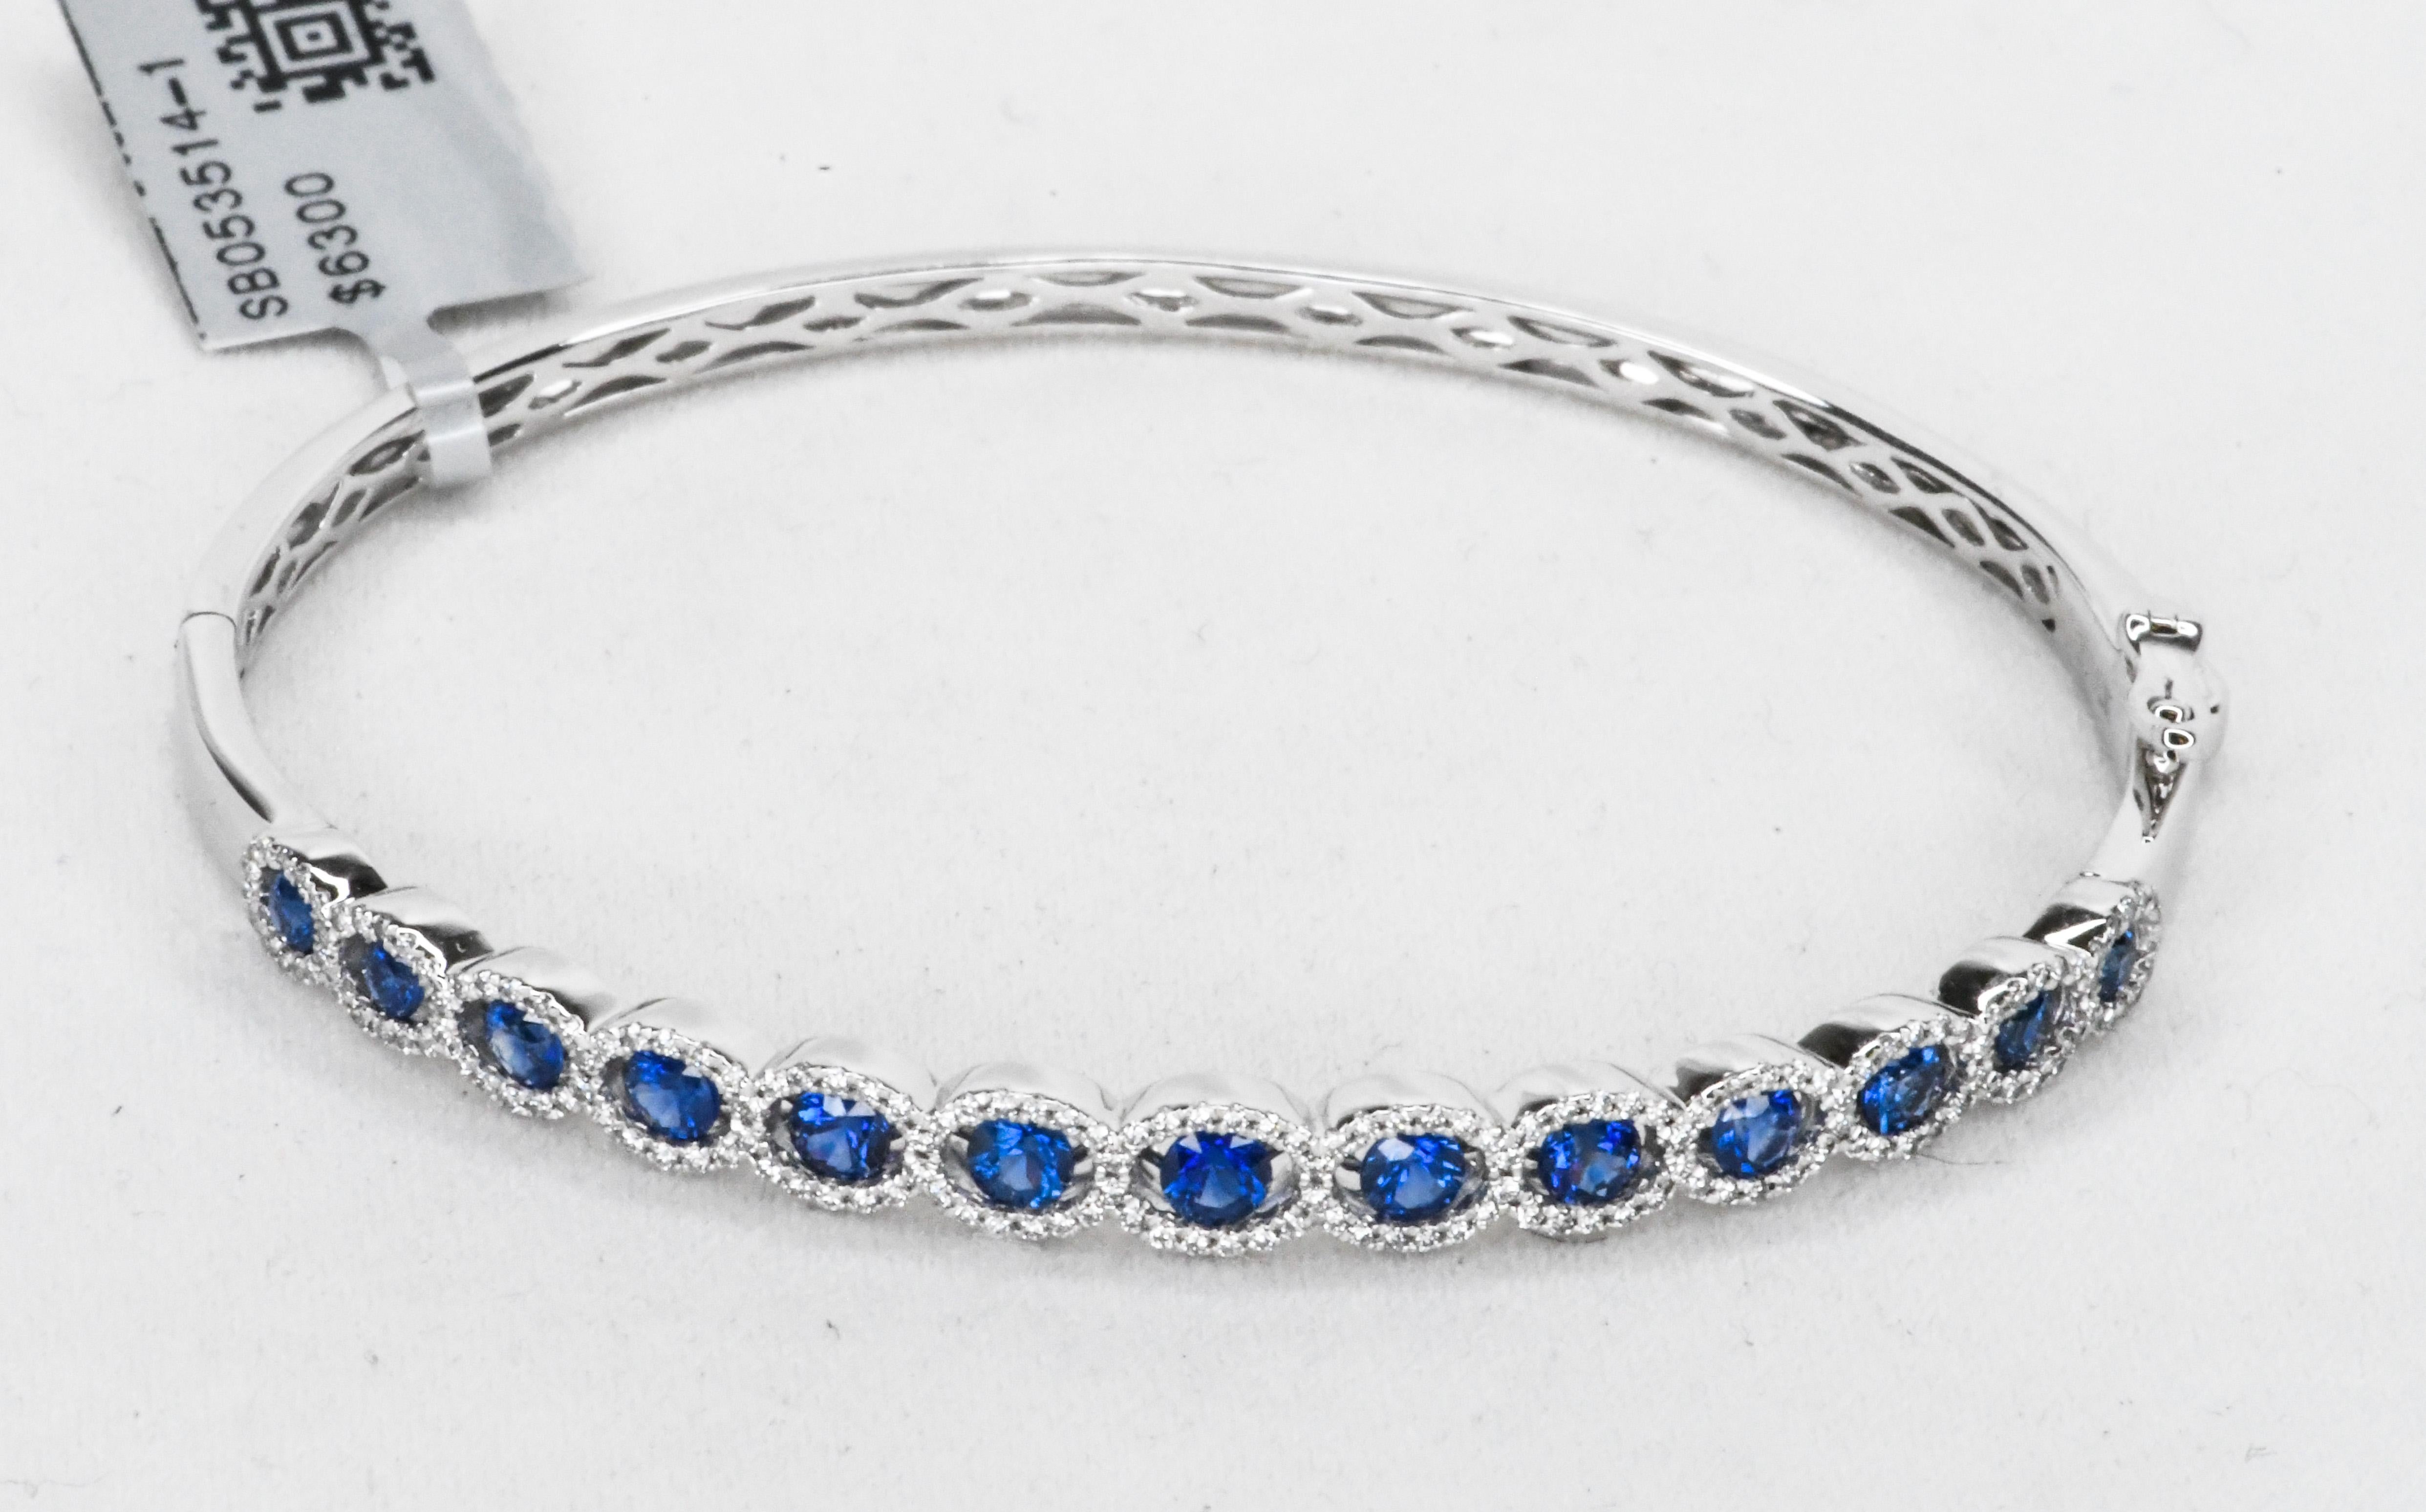 The combination of blue sapphire and white diamonds is perhaps the most sophisticated look in Fine Jewelry!
This hinged bangle bracelet is suitable for every day wear.  From day to night.  Fabricated in 18 karat white gold, it features thirteen